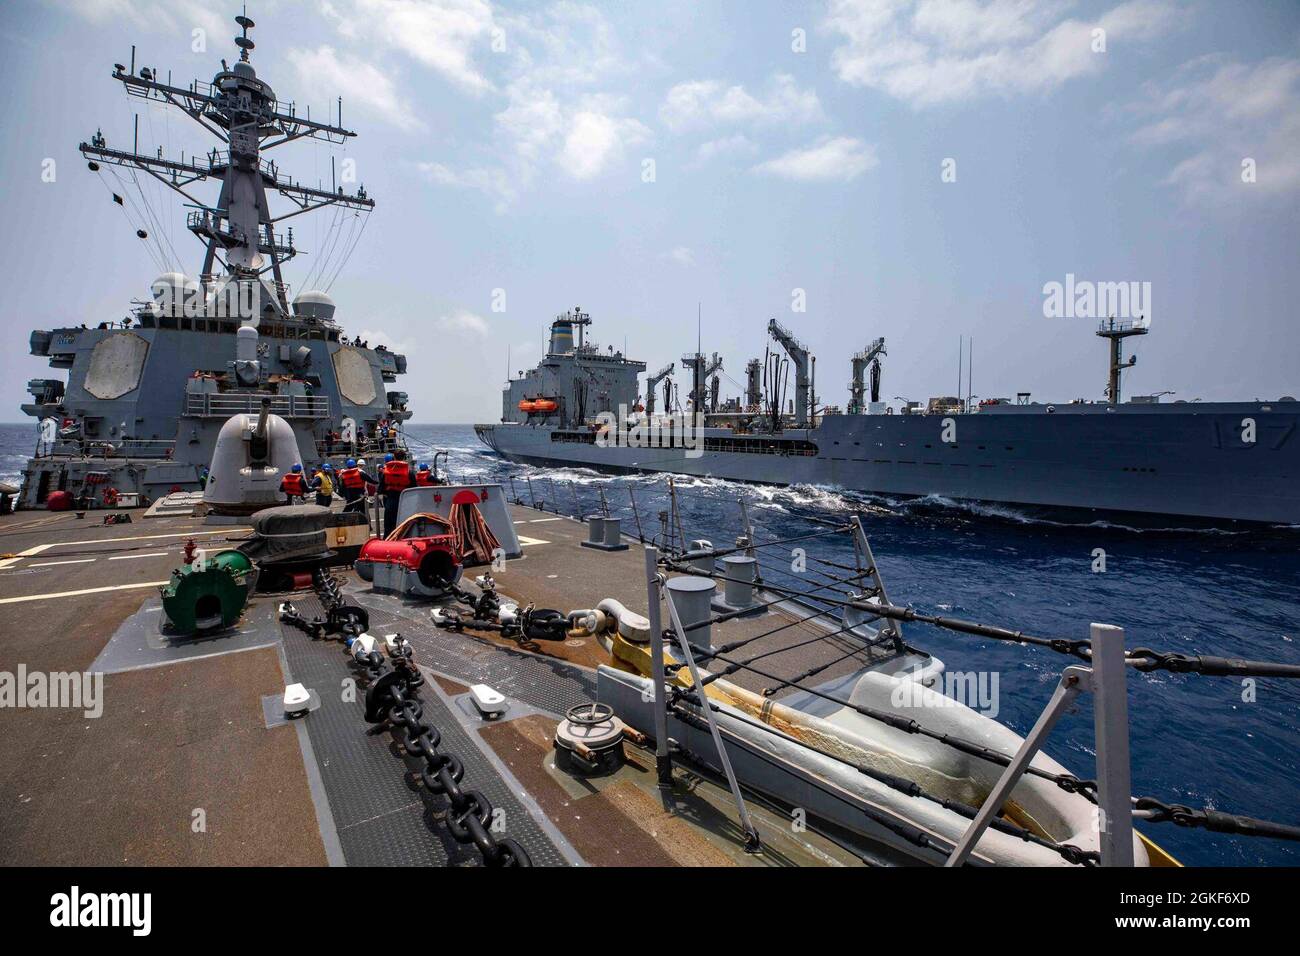 SOUTH CHINA SEA (April 06, 2021) - Arleigh Burke-class guided-missile destroyer USS Barry (DDG 52) conducts a replenishment-at-sea with Lewis and Clark class dry cargo ship USNS Pecos. Barry is assigned to Task Force 71/Destroyer Squadron FIFTEEN (DESRON 15), the Navy’s largest forward deployed DESRON and the U.S. 7th Fleet’s principal surface force. Stock Photo